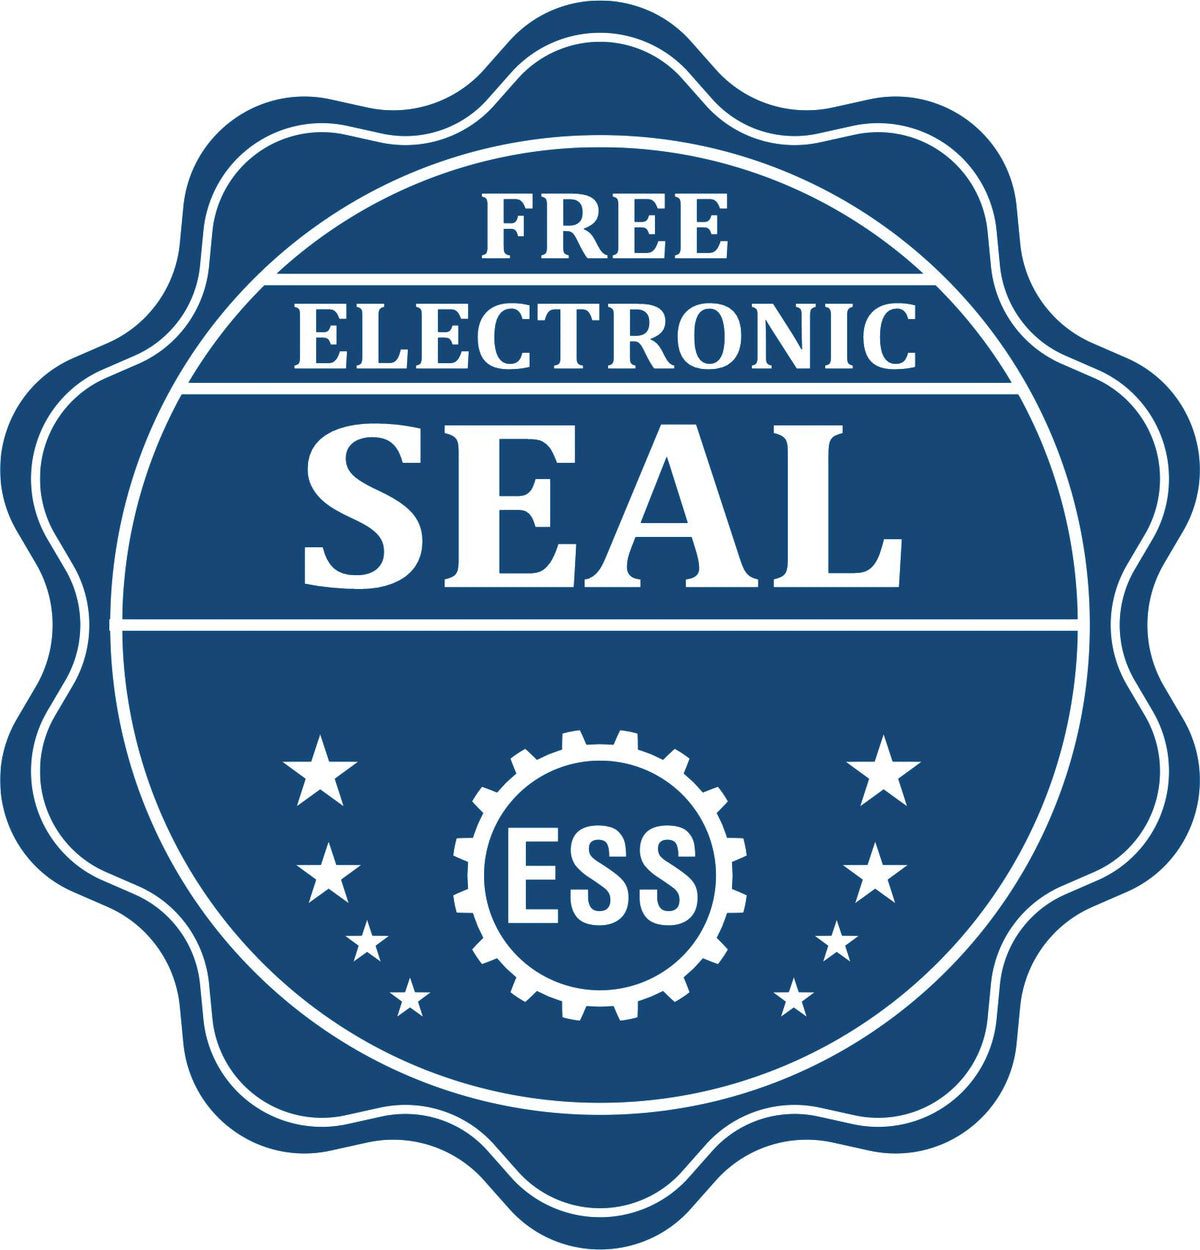 A badge showing a free electronic seal for the Slim Pre-Inked Arizona Professional Engineer Seal Stamp with stars and the ESS gear on the emblem.